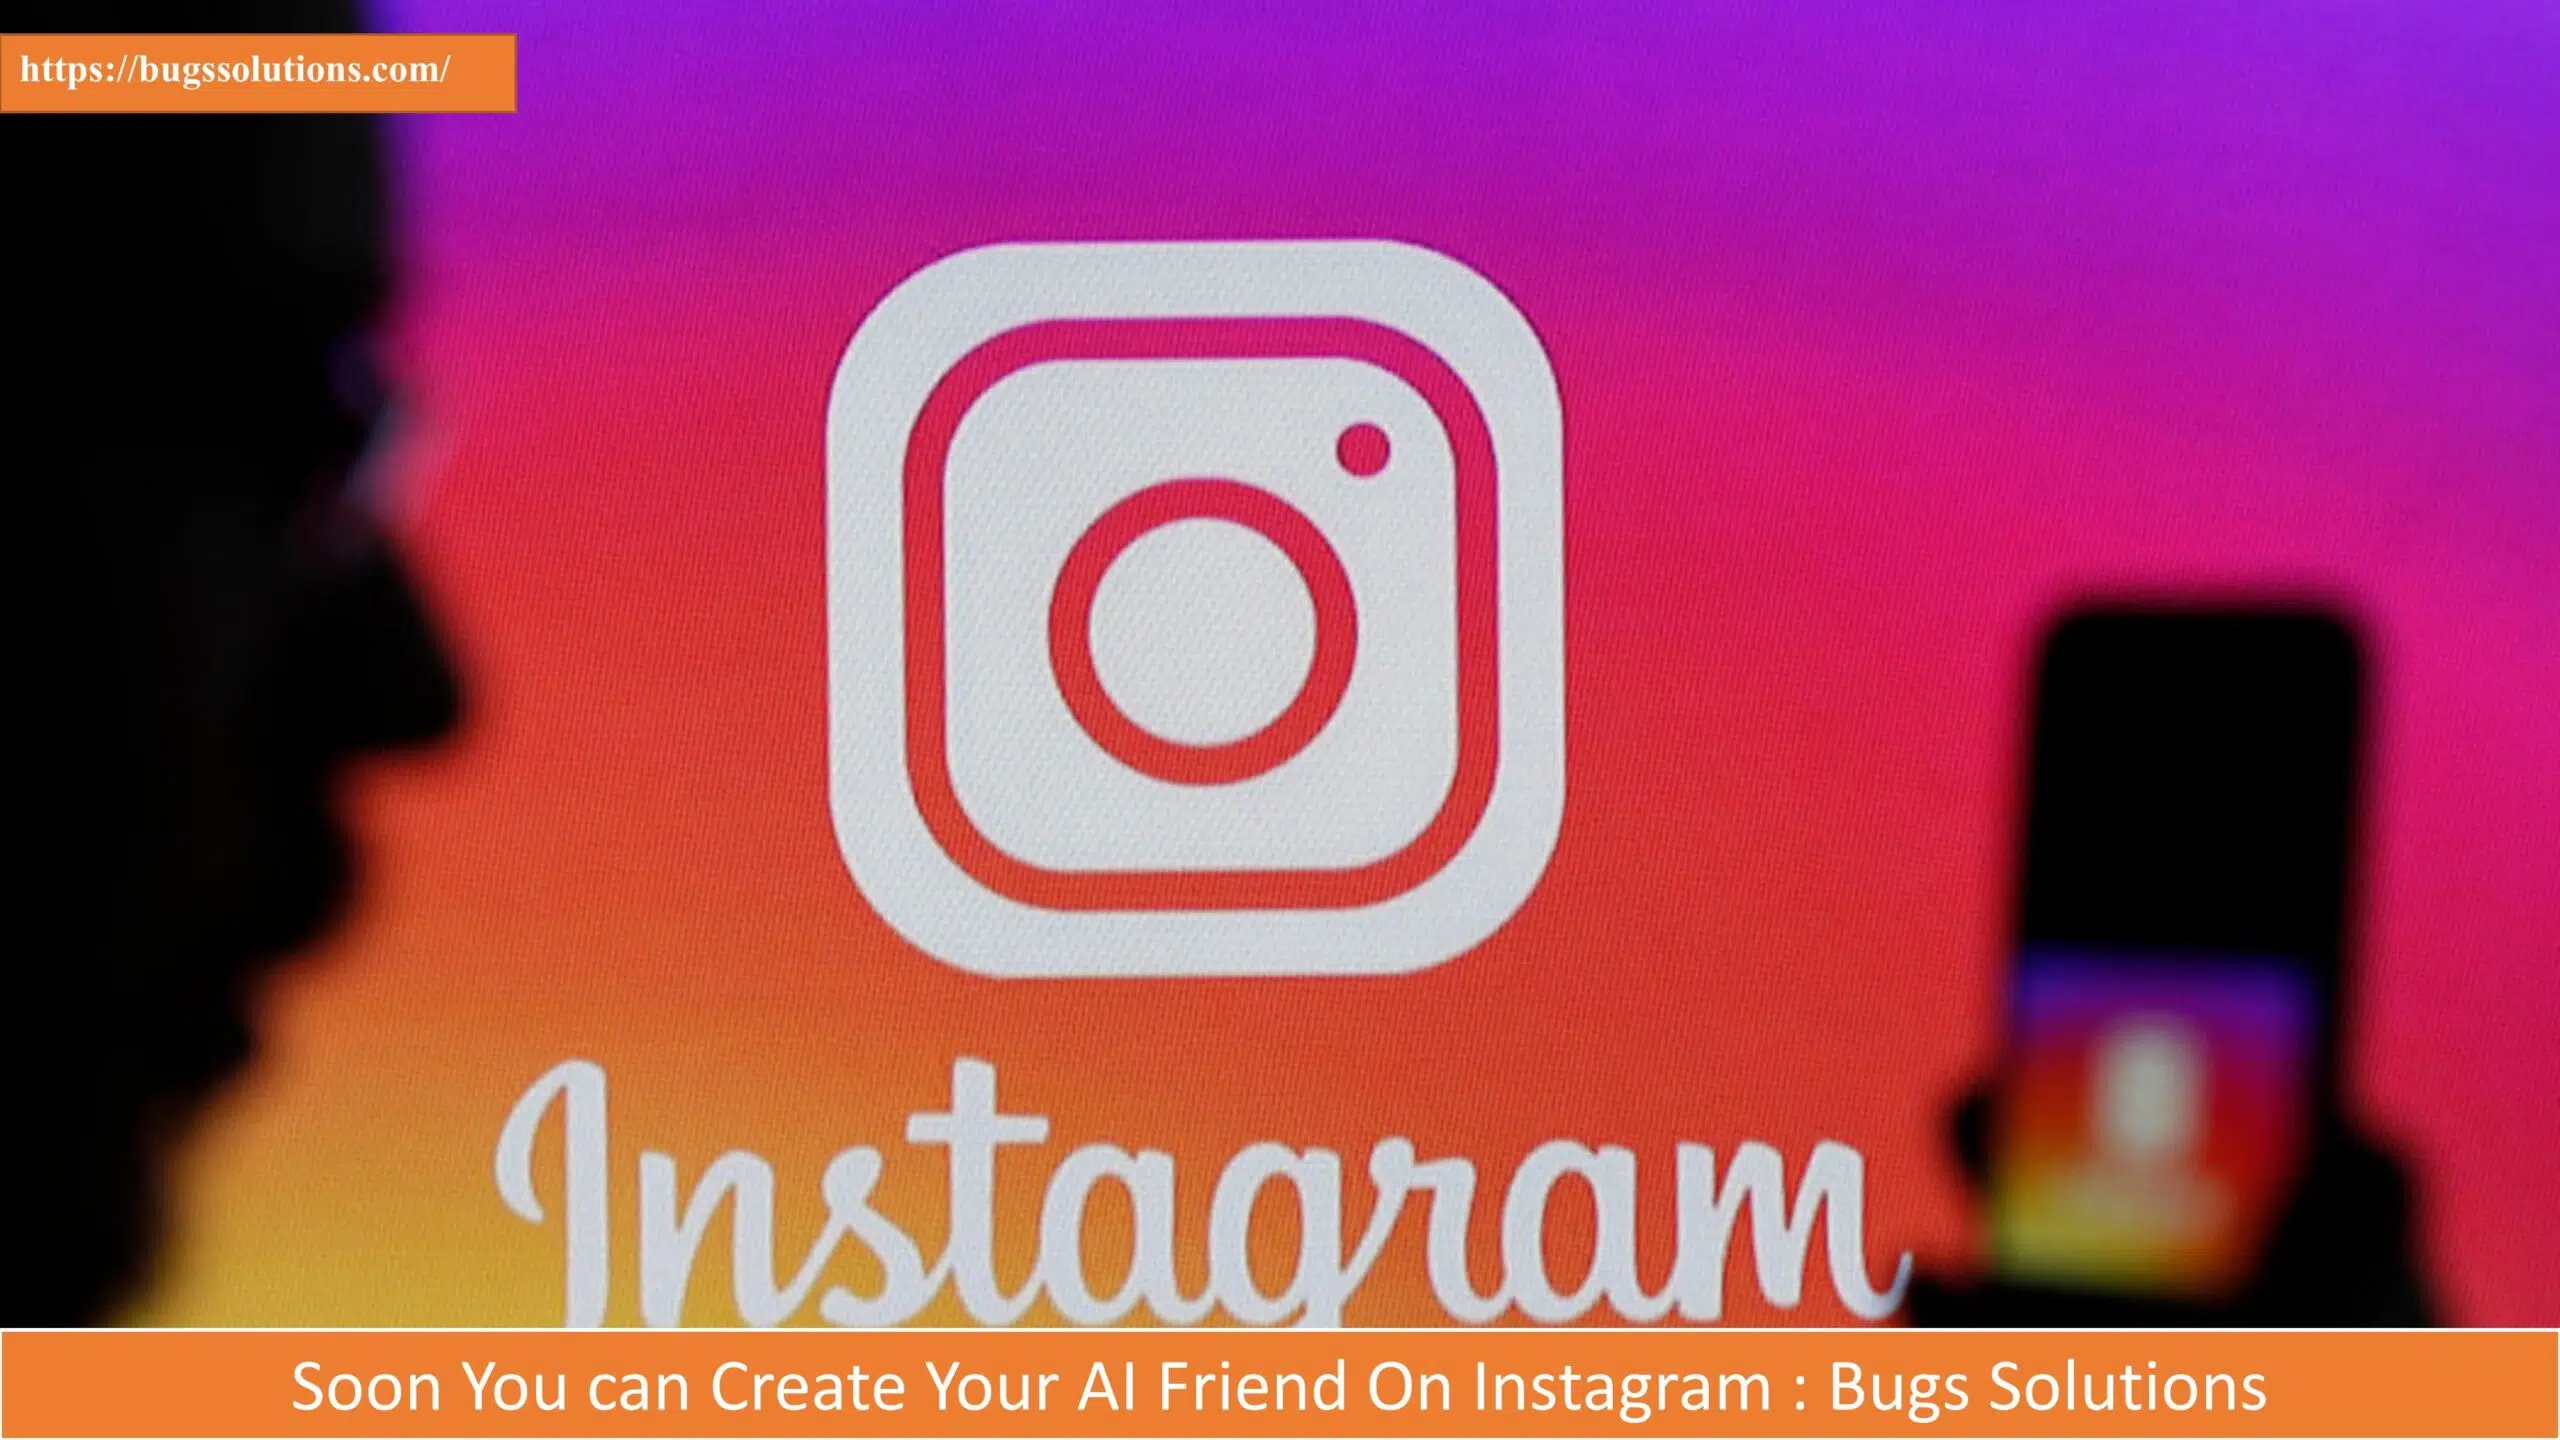 Soon You can Create Your AI Friend On Instagram : Bugs Solutions